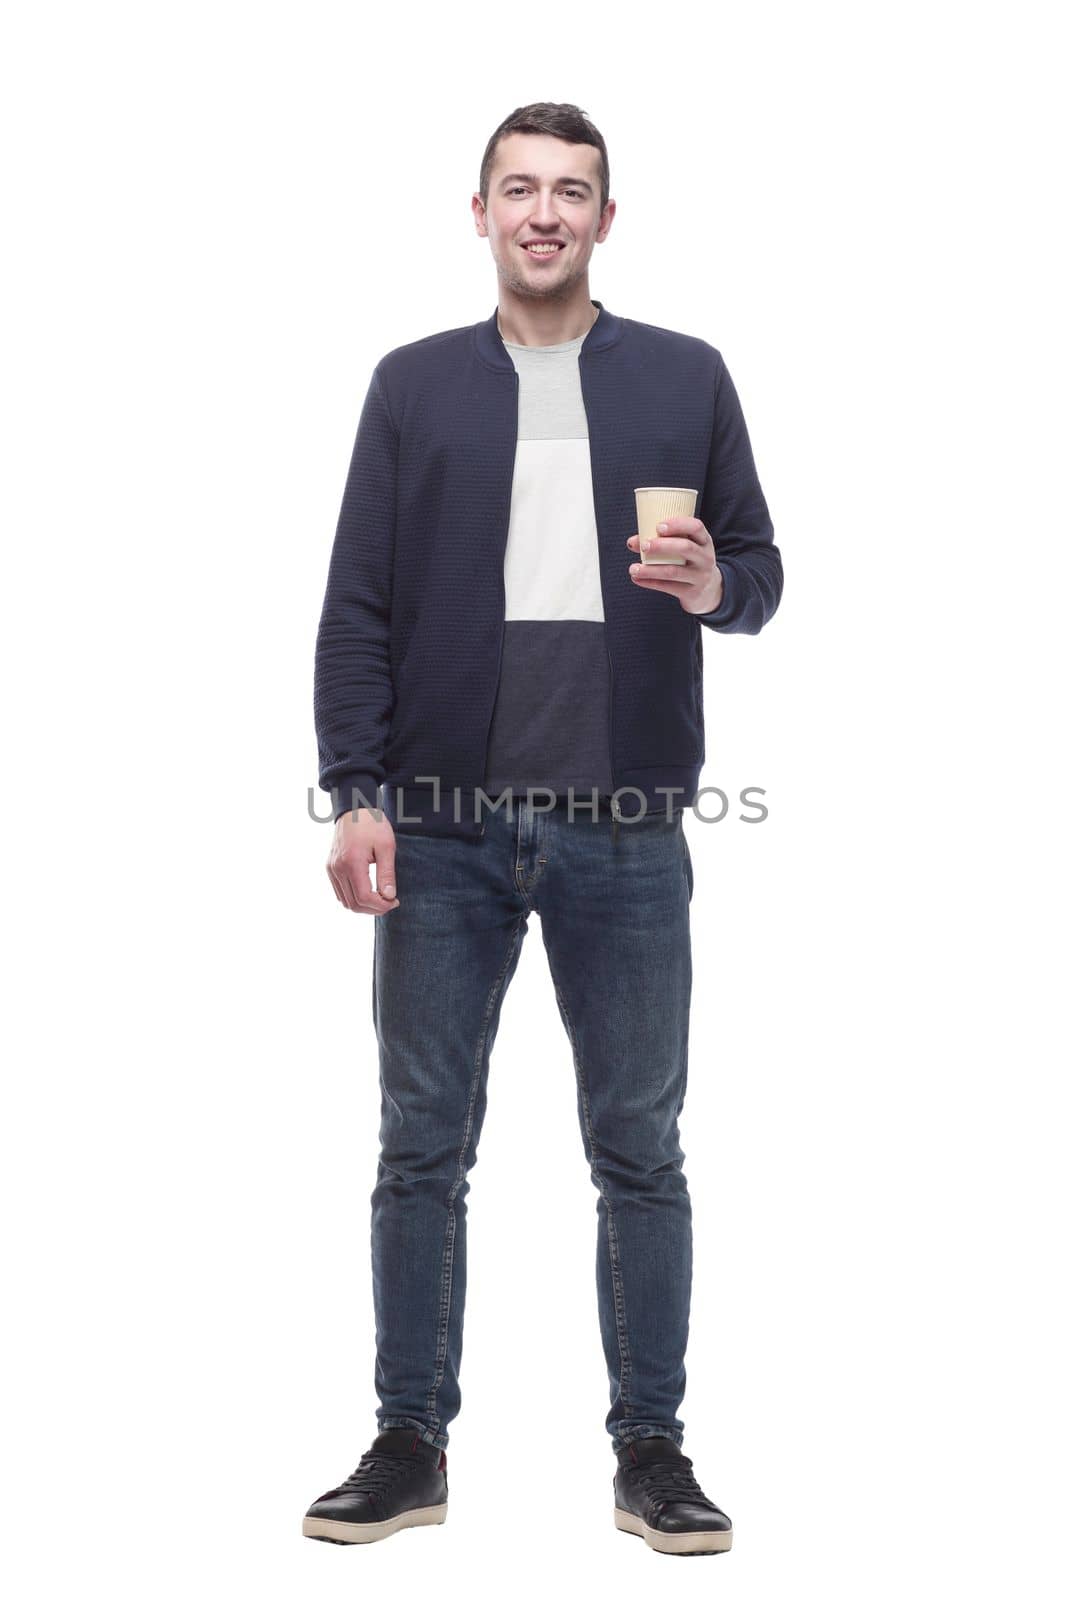 smiling guy with a takeaway coffee . isolated on a white background.